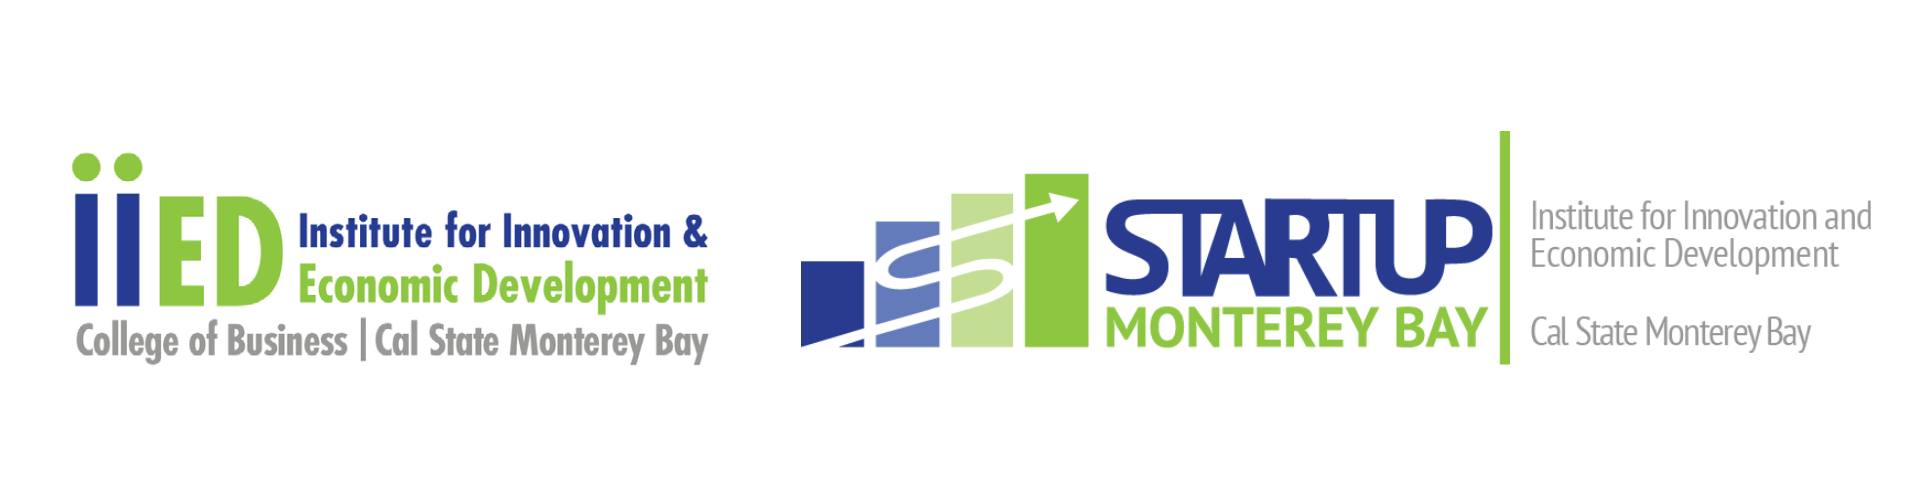 Institute for Innovation and Economic Development and Startup Monterey Bay logos